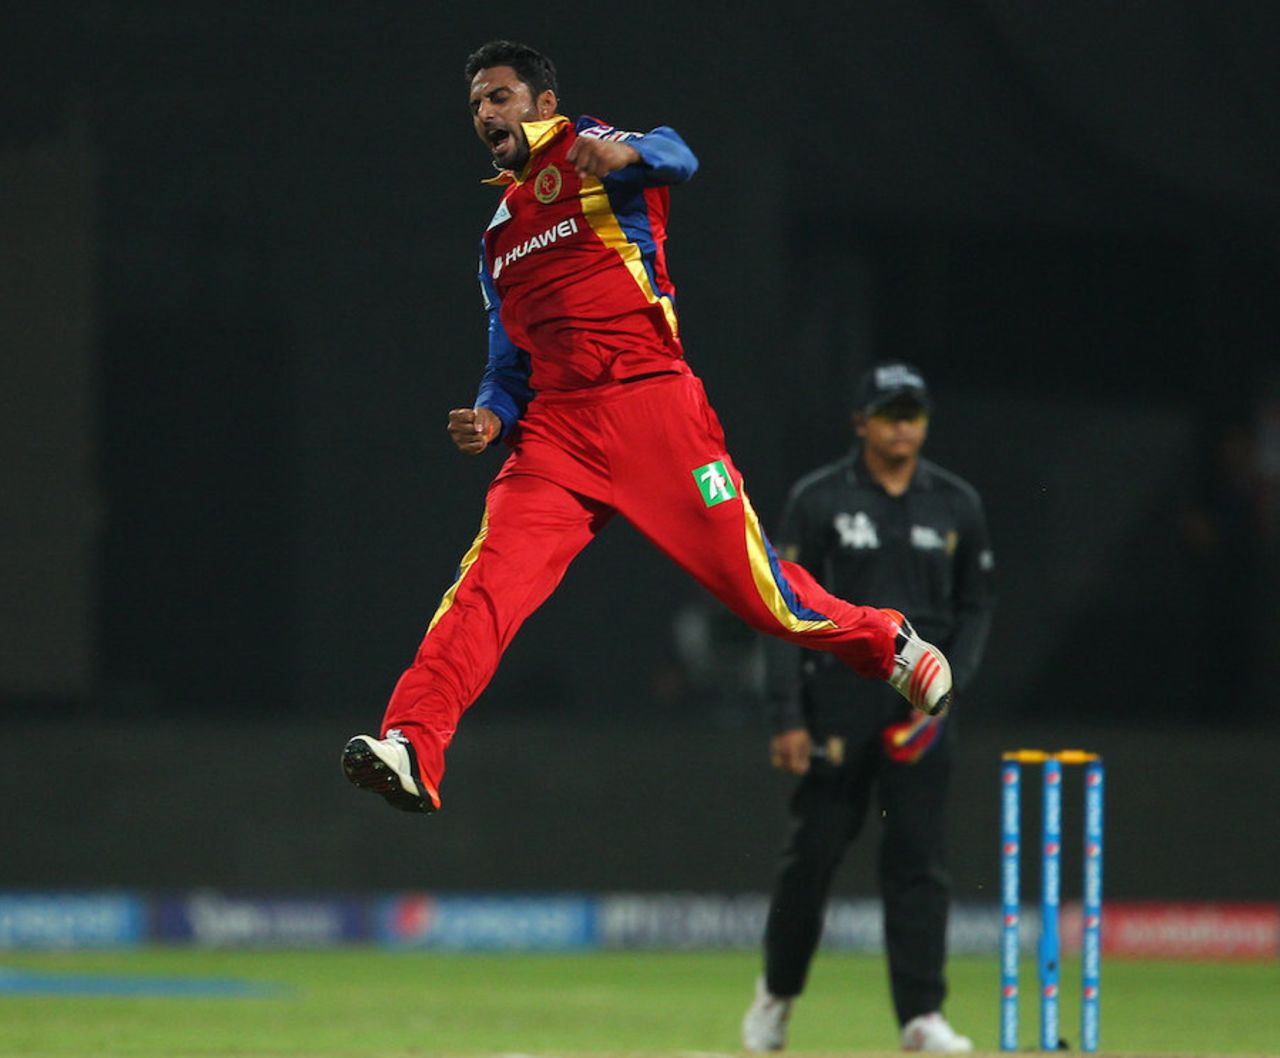 S Aravind was flying after running through Kings XI Punjab's top order, Royal Challengers Bangalore v Kings XI Punjab, IPL 2015, Bangalore, May 6, 2015